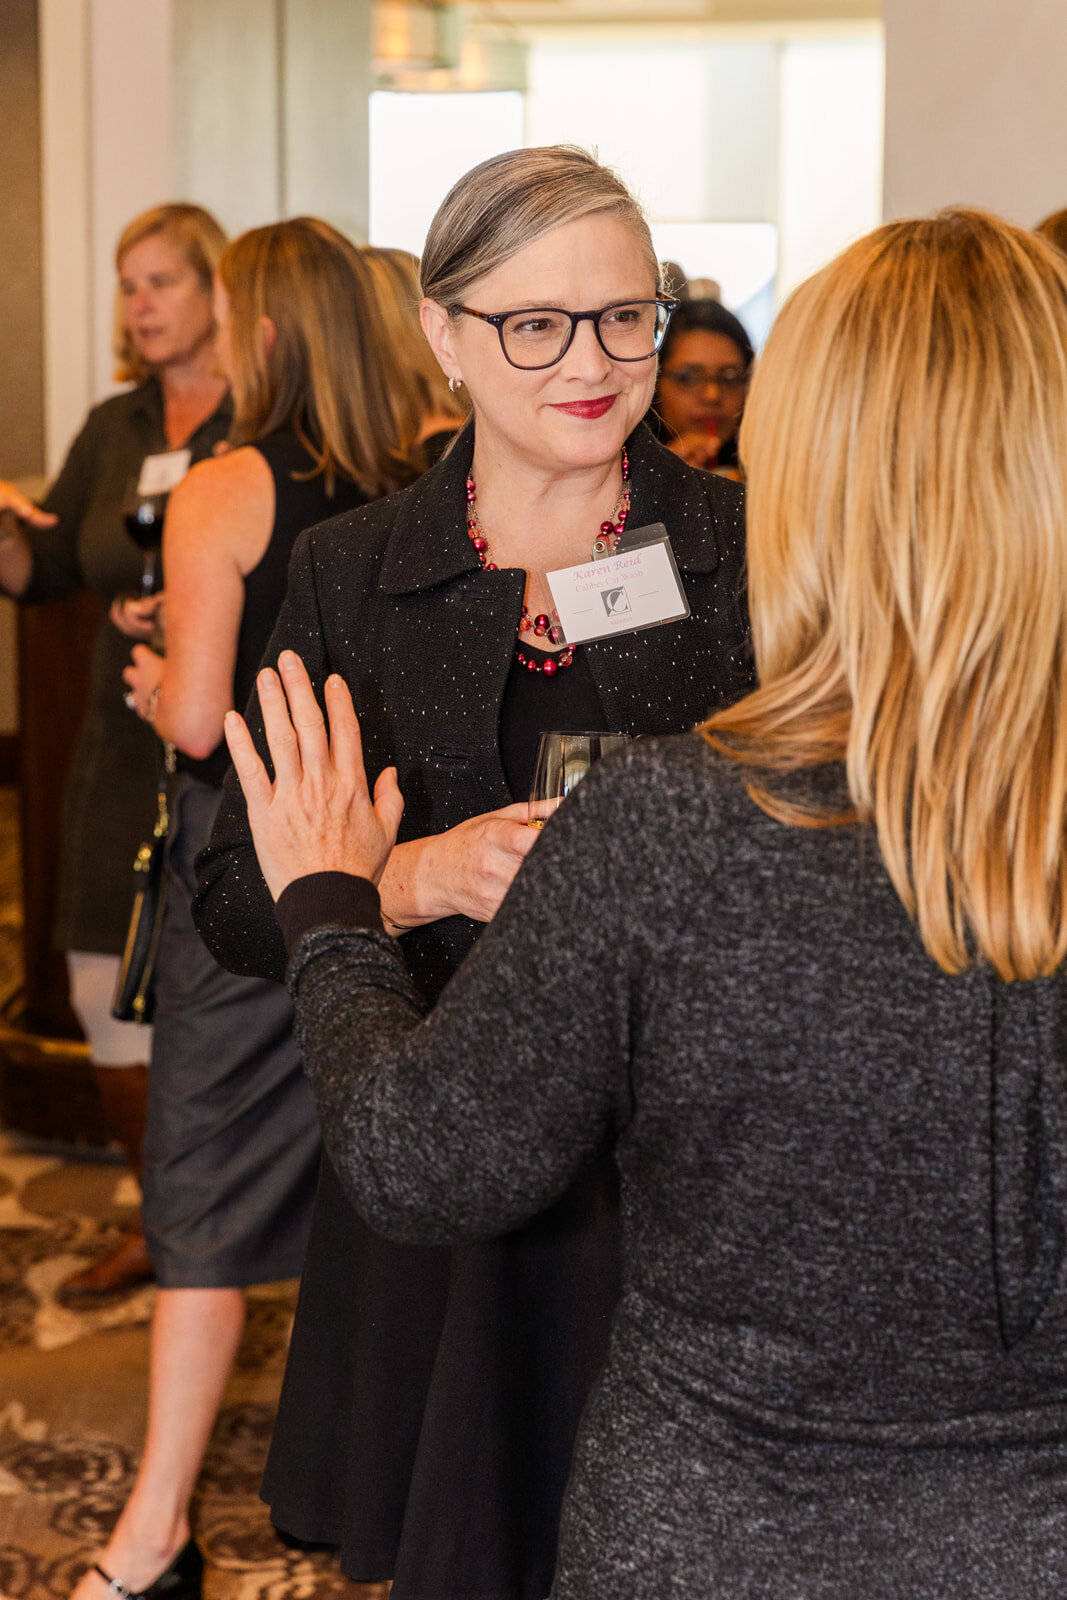 Business woman talking during an Atlanta networking event at the Atlanta Buckhead Club by event photographer Laure Photography